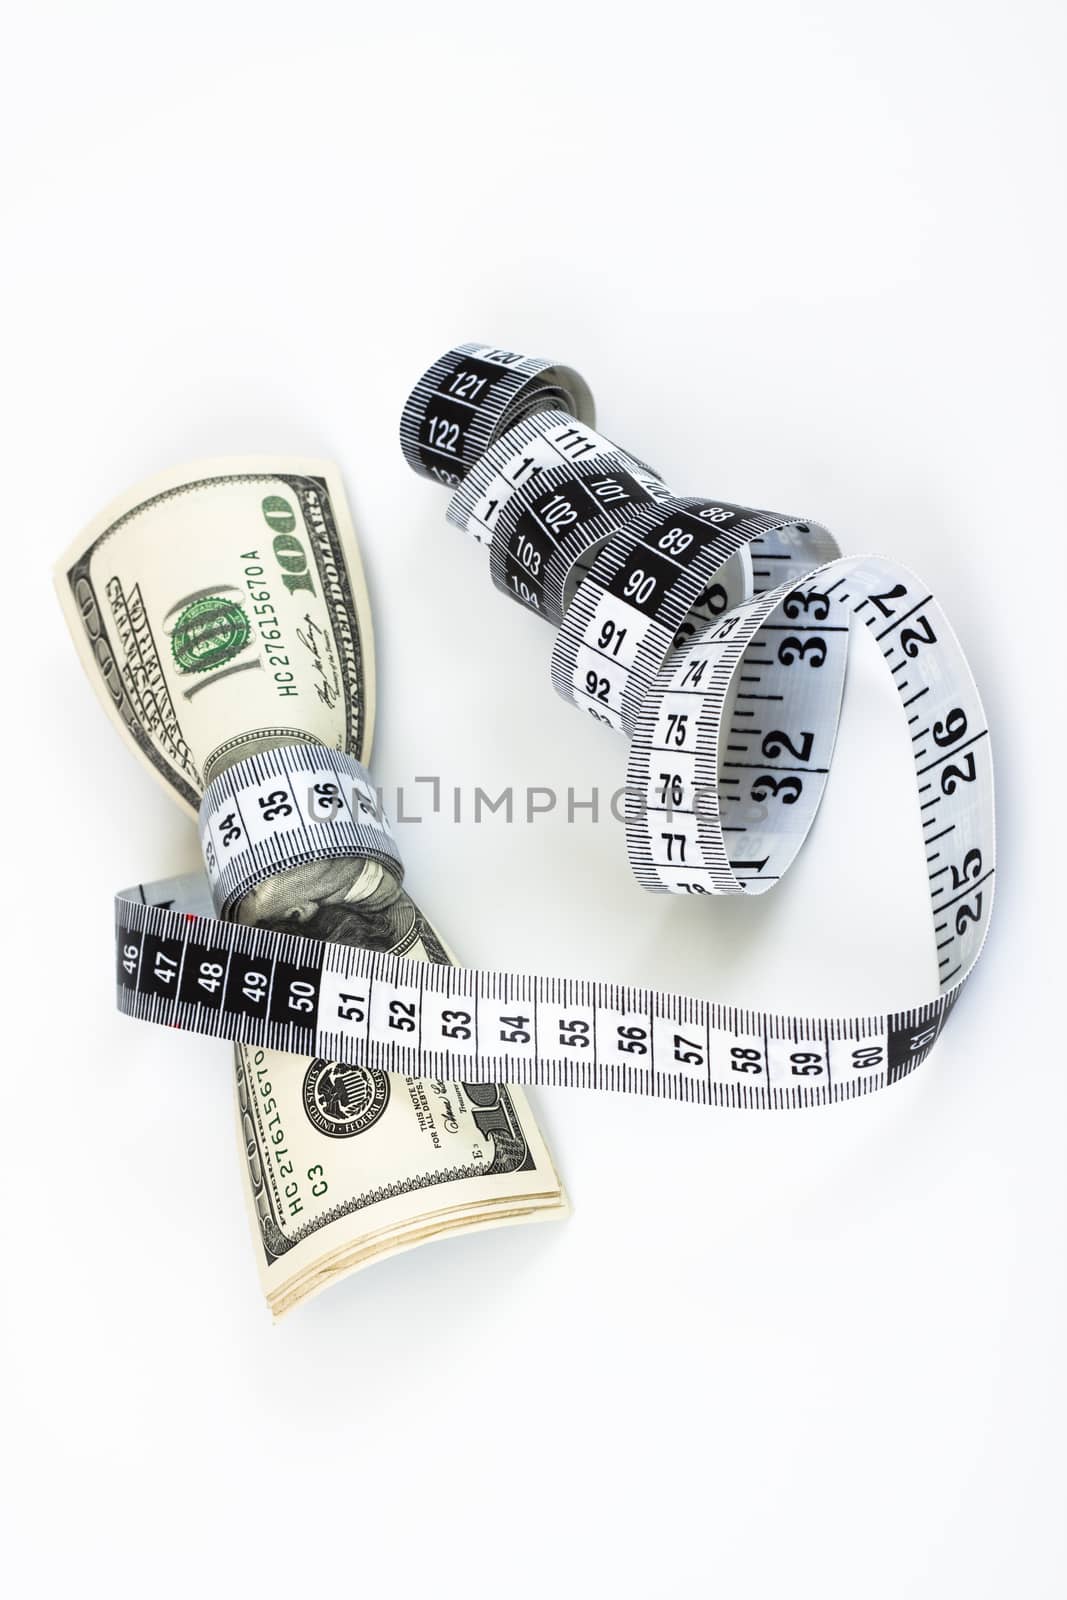 100 dollar bills tight with a measuring tape on white background